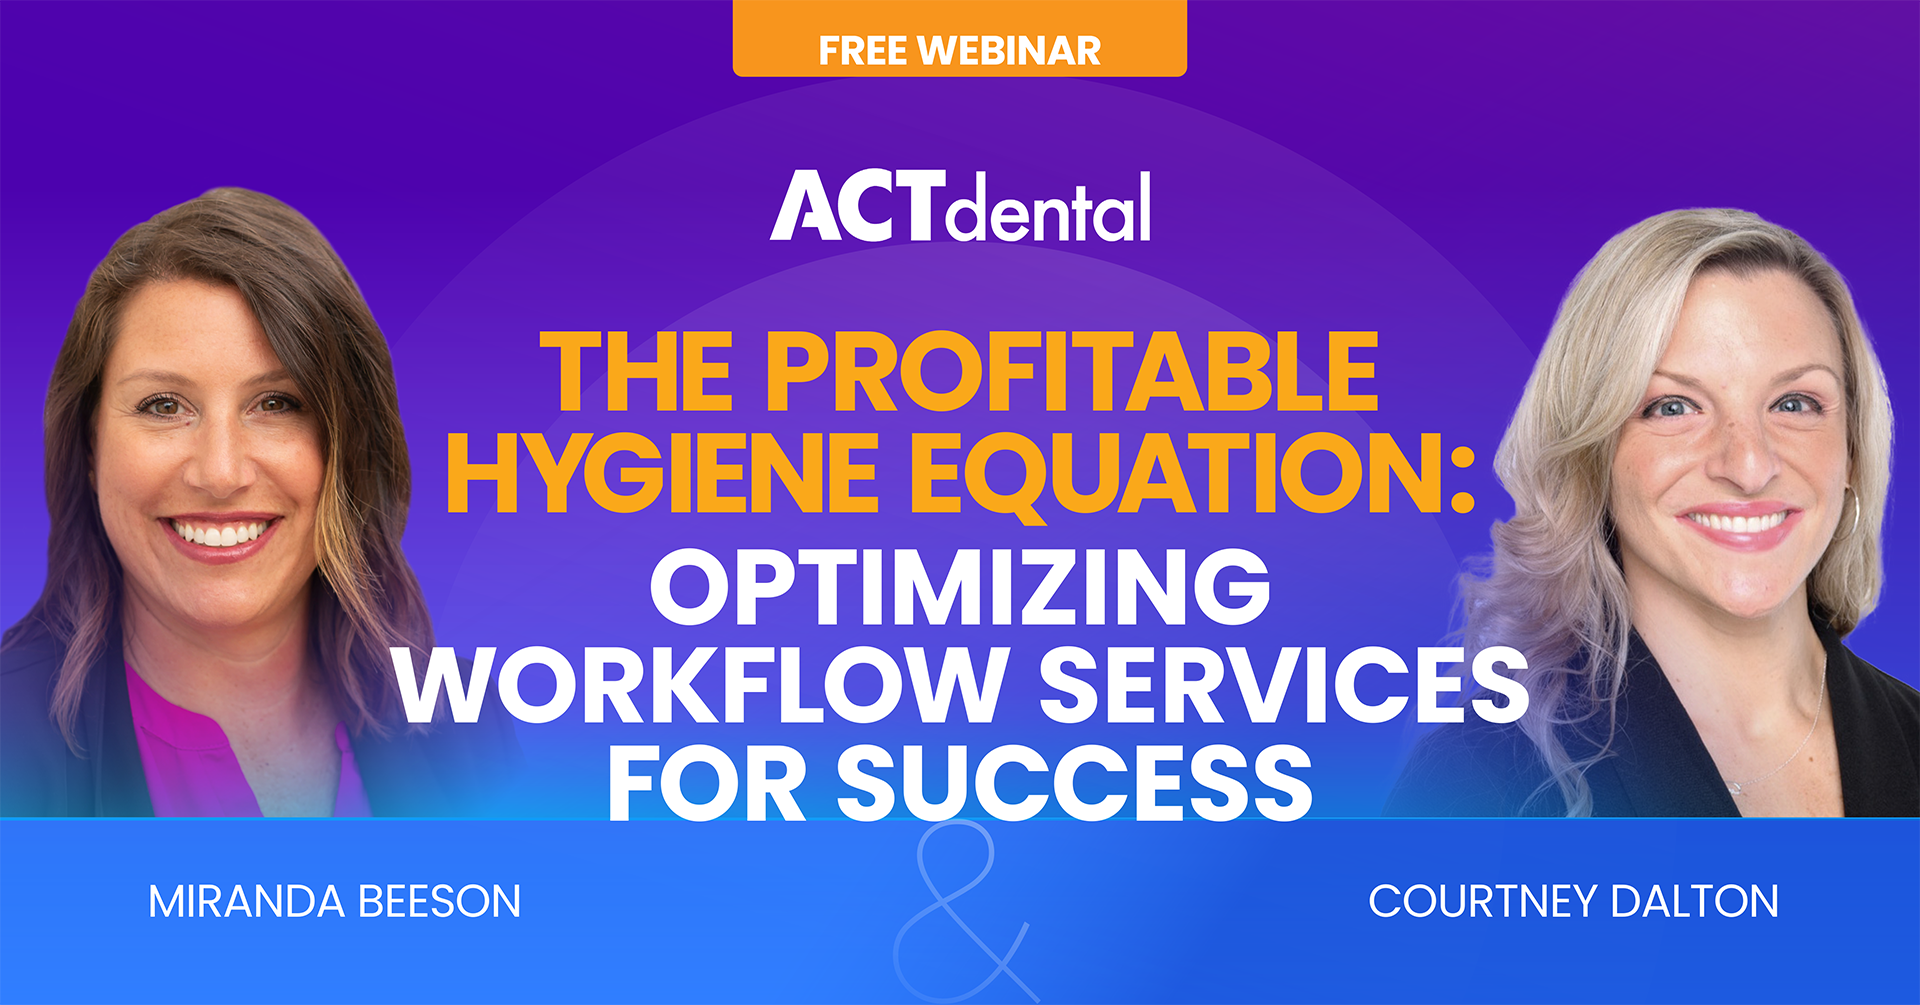 The Profitable Hygiene Equation: Optimizing Workflow Services for Success